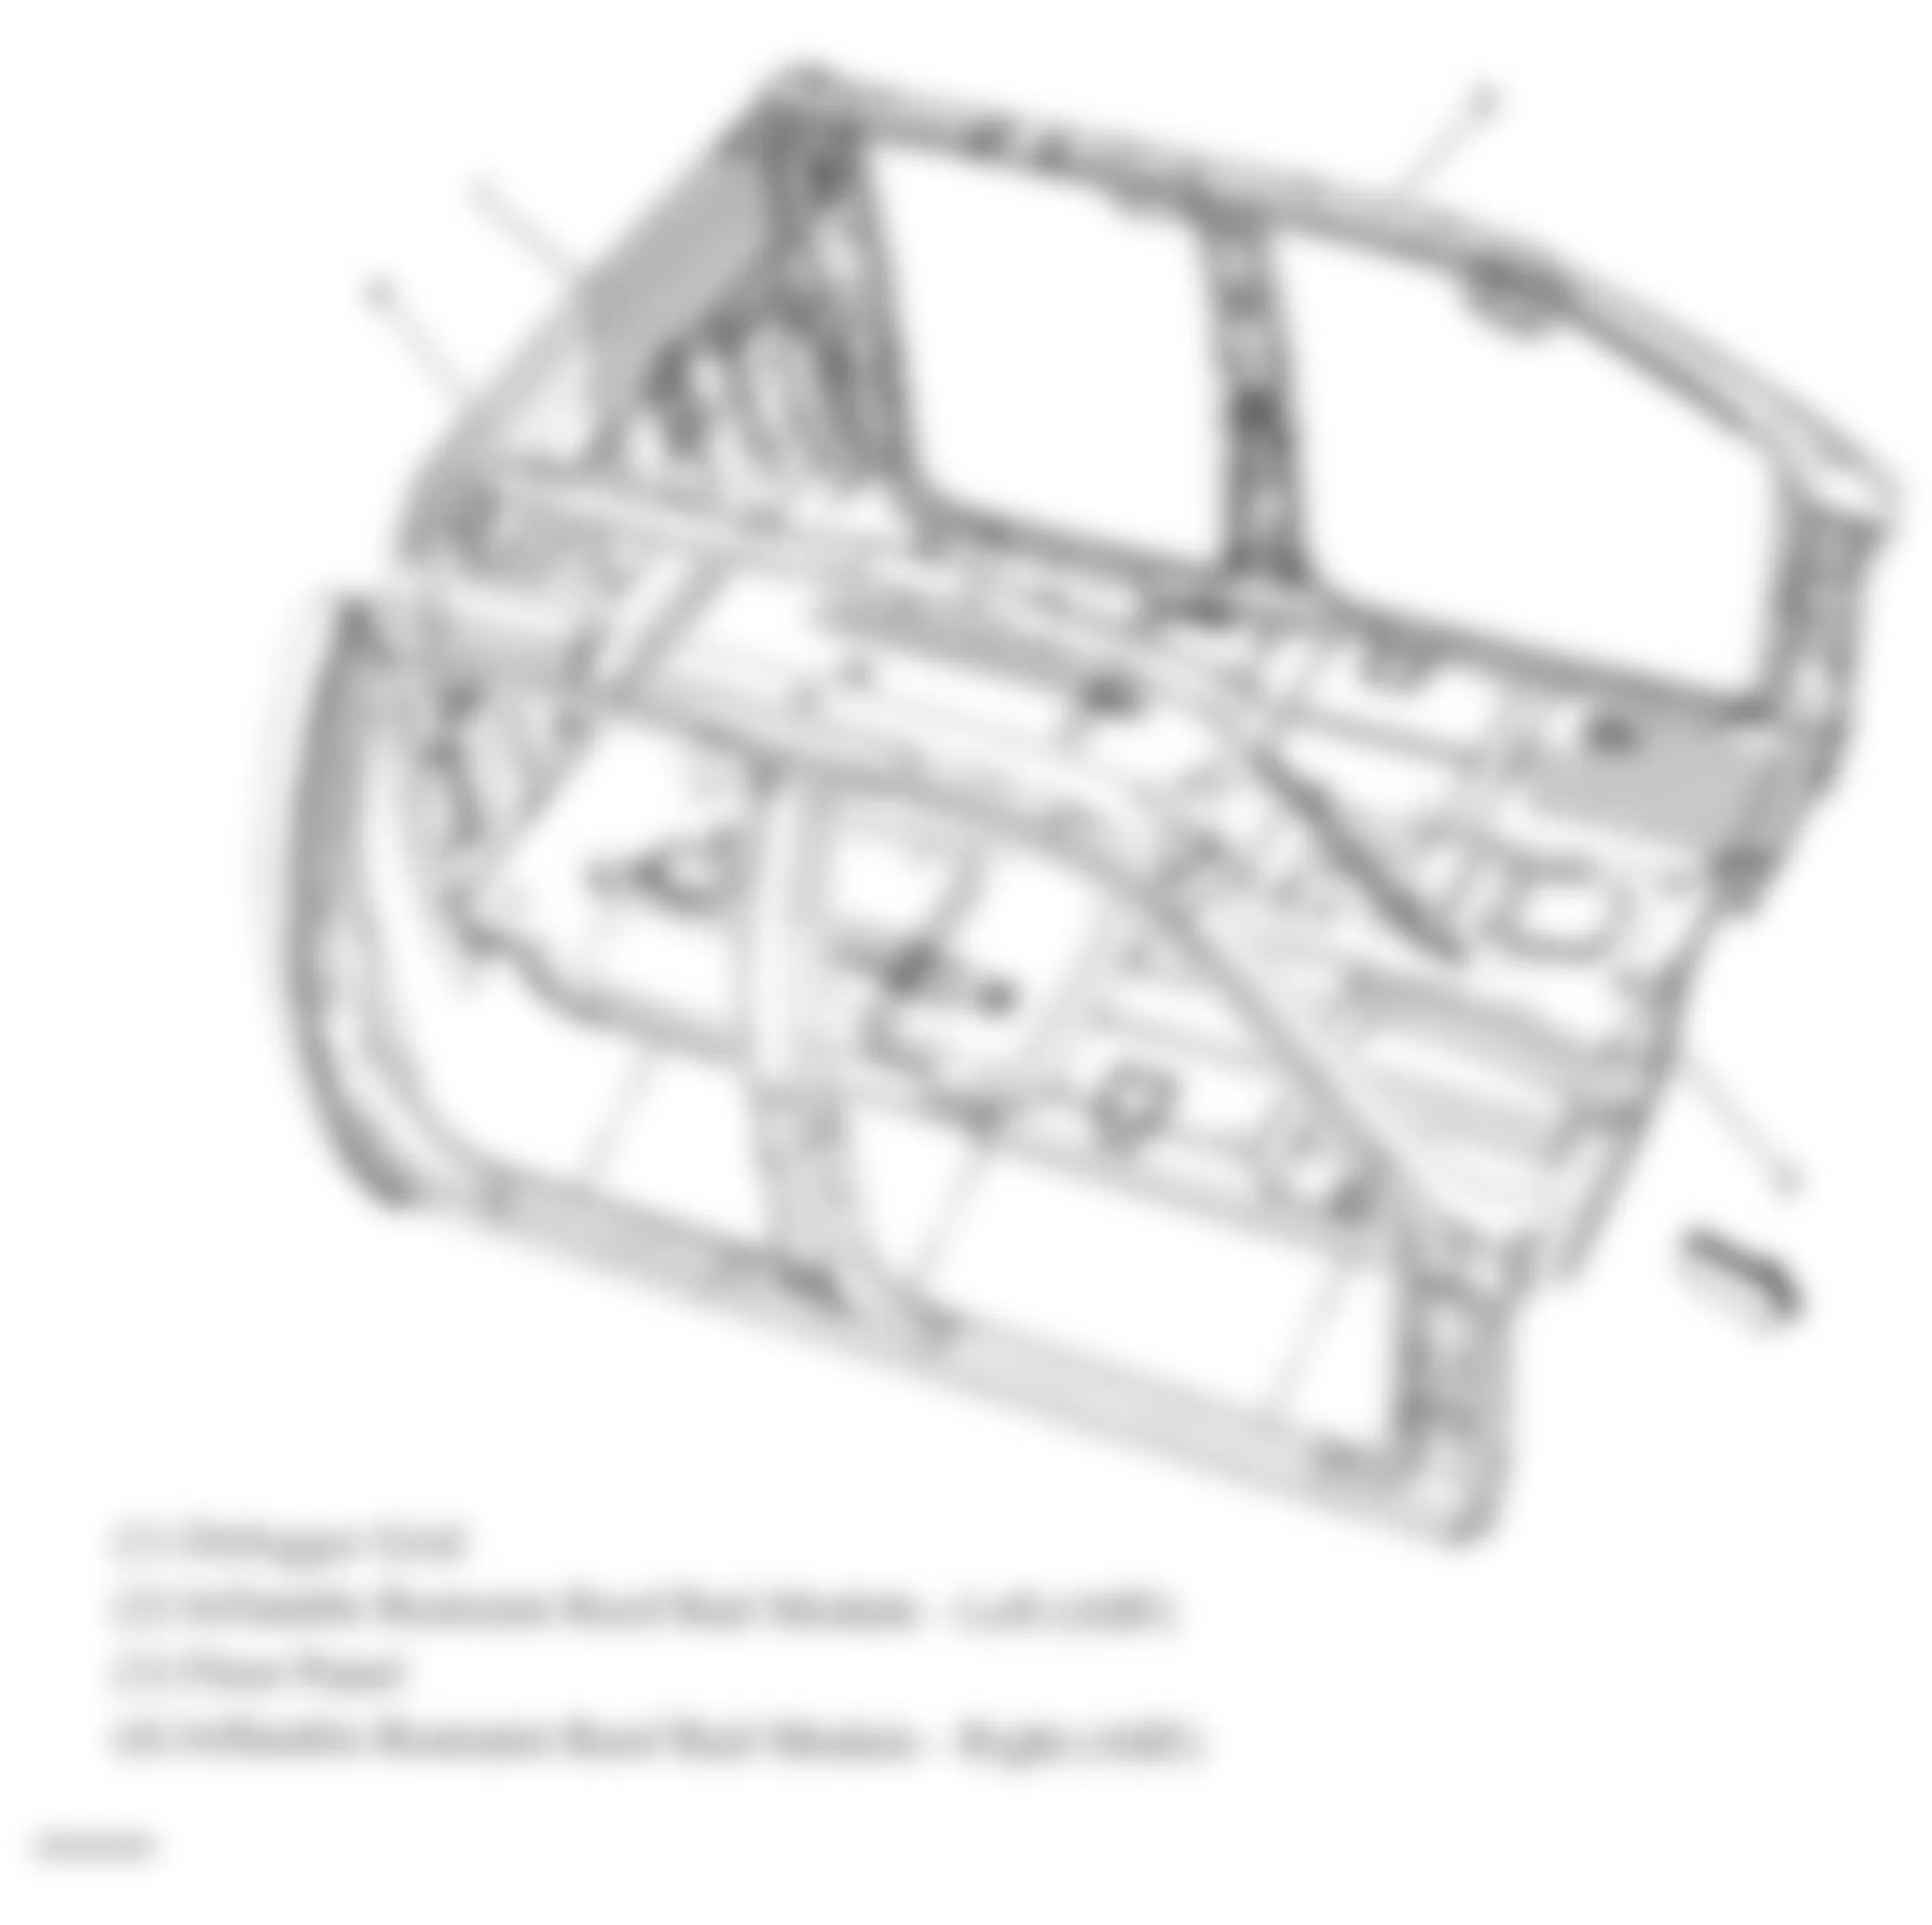 GMC Sierra 1500 2008 - Component Locations -  Roof Rail Air Bags (Extended Cab & Crew Cab)